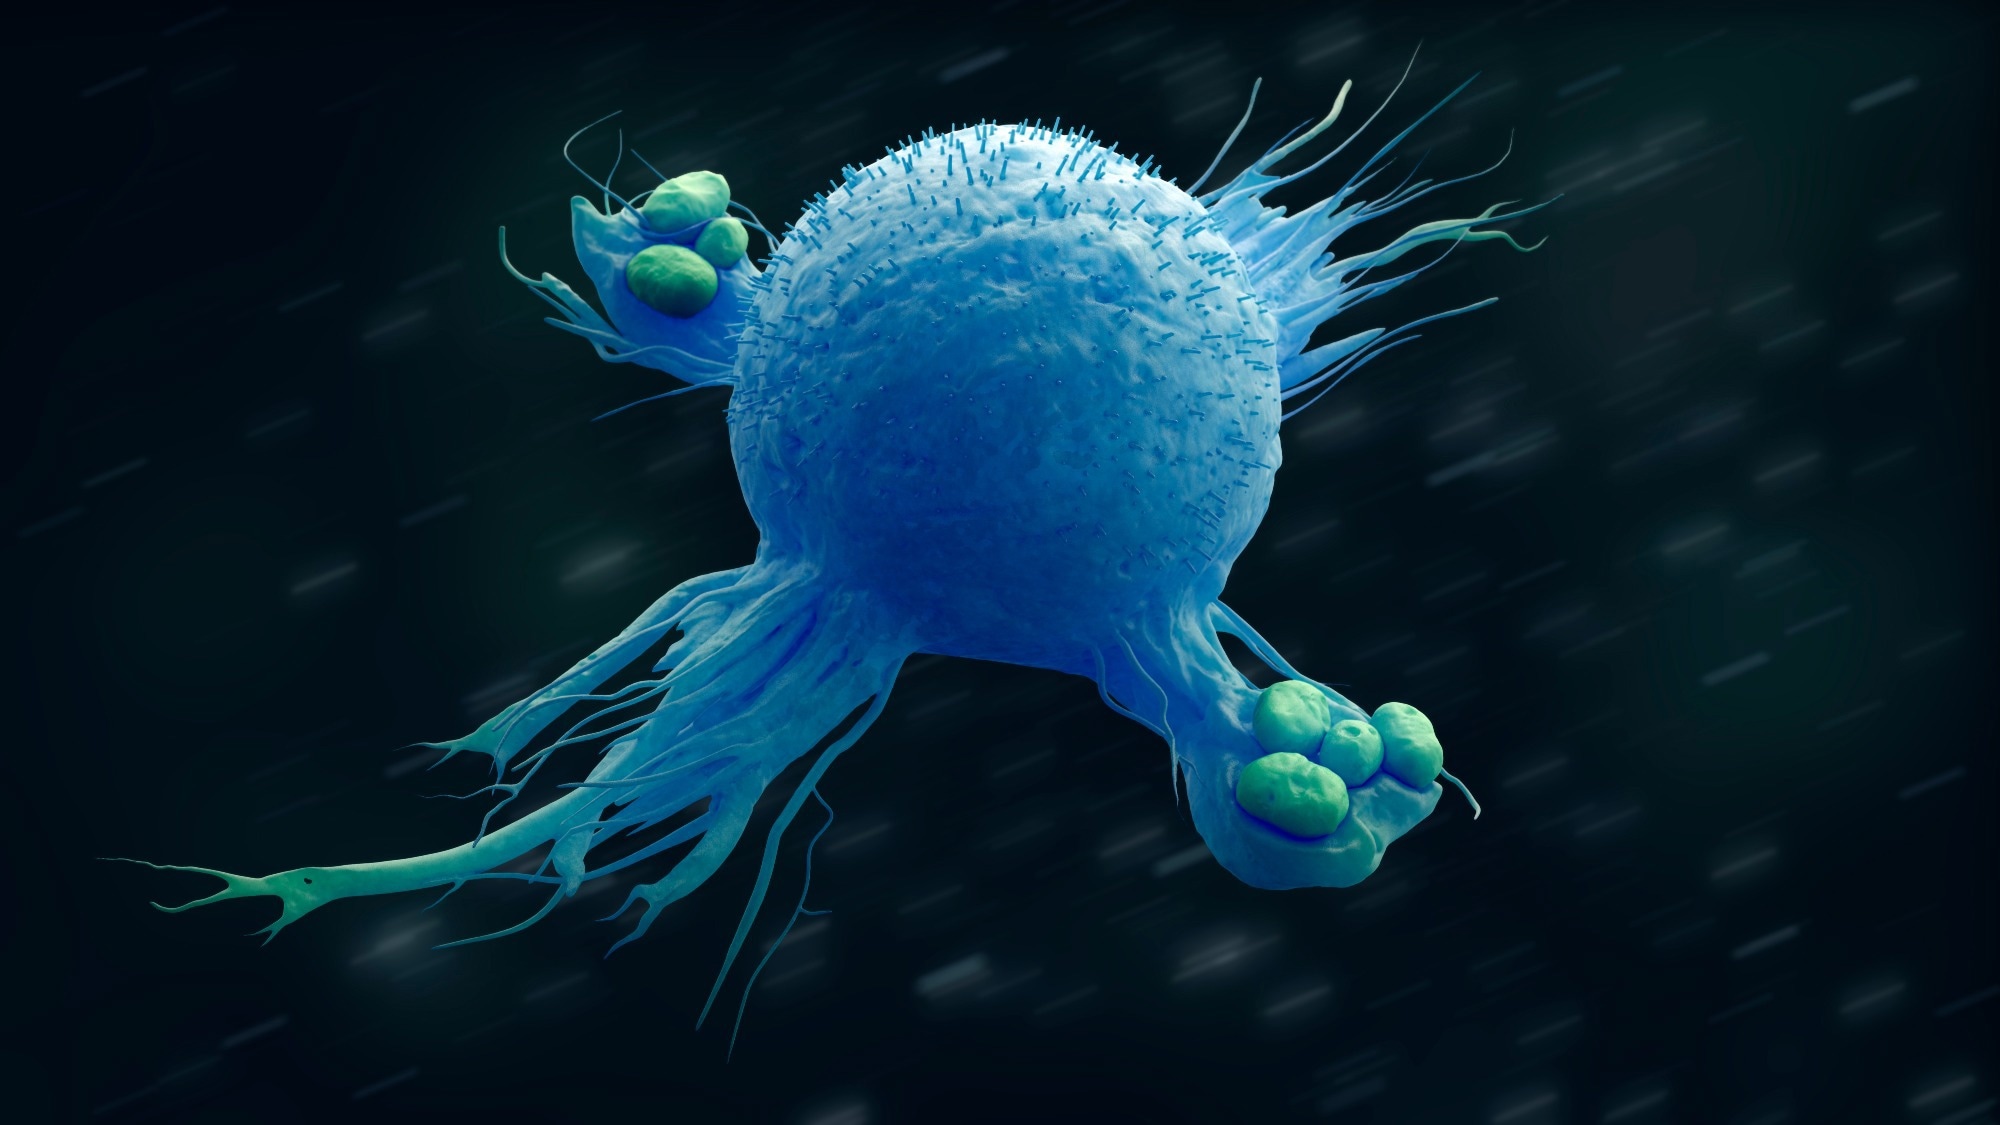 Study: Macrophages in health and disease. Image Credit: urfin/Shutterstock